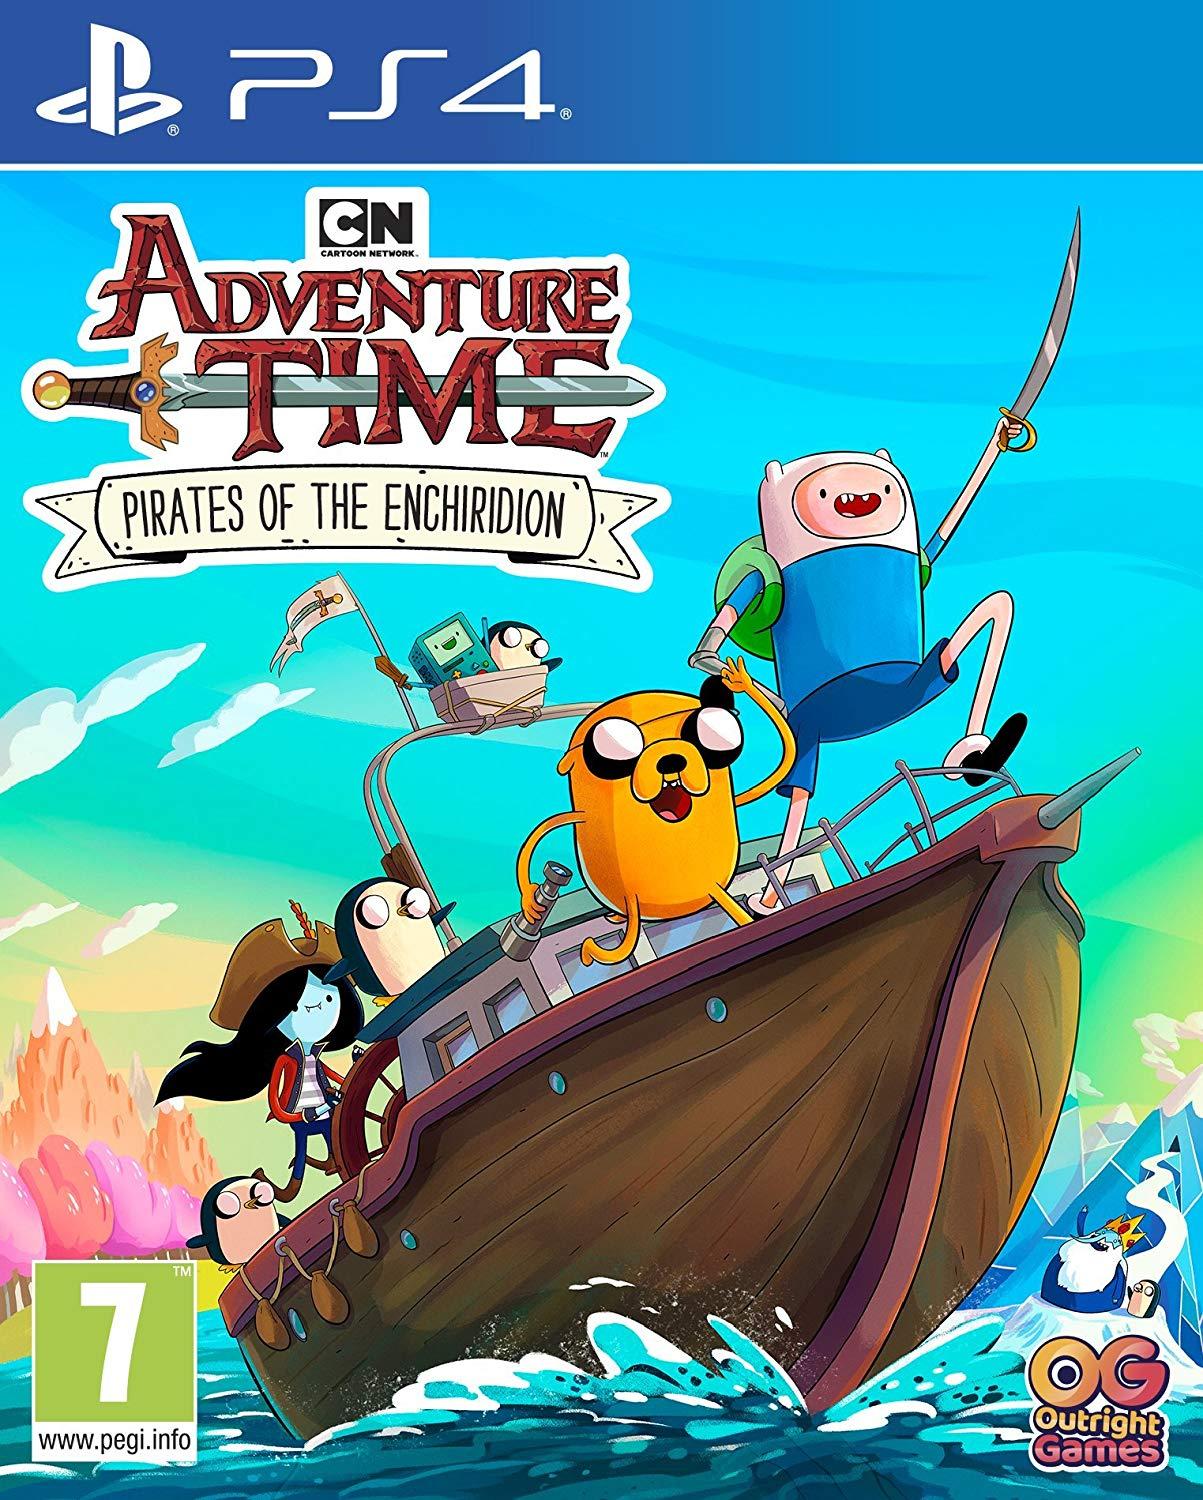 Adventure Time Pirates of The Enchiridion (PS4): Amazon.co.uk: PC